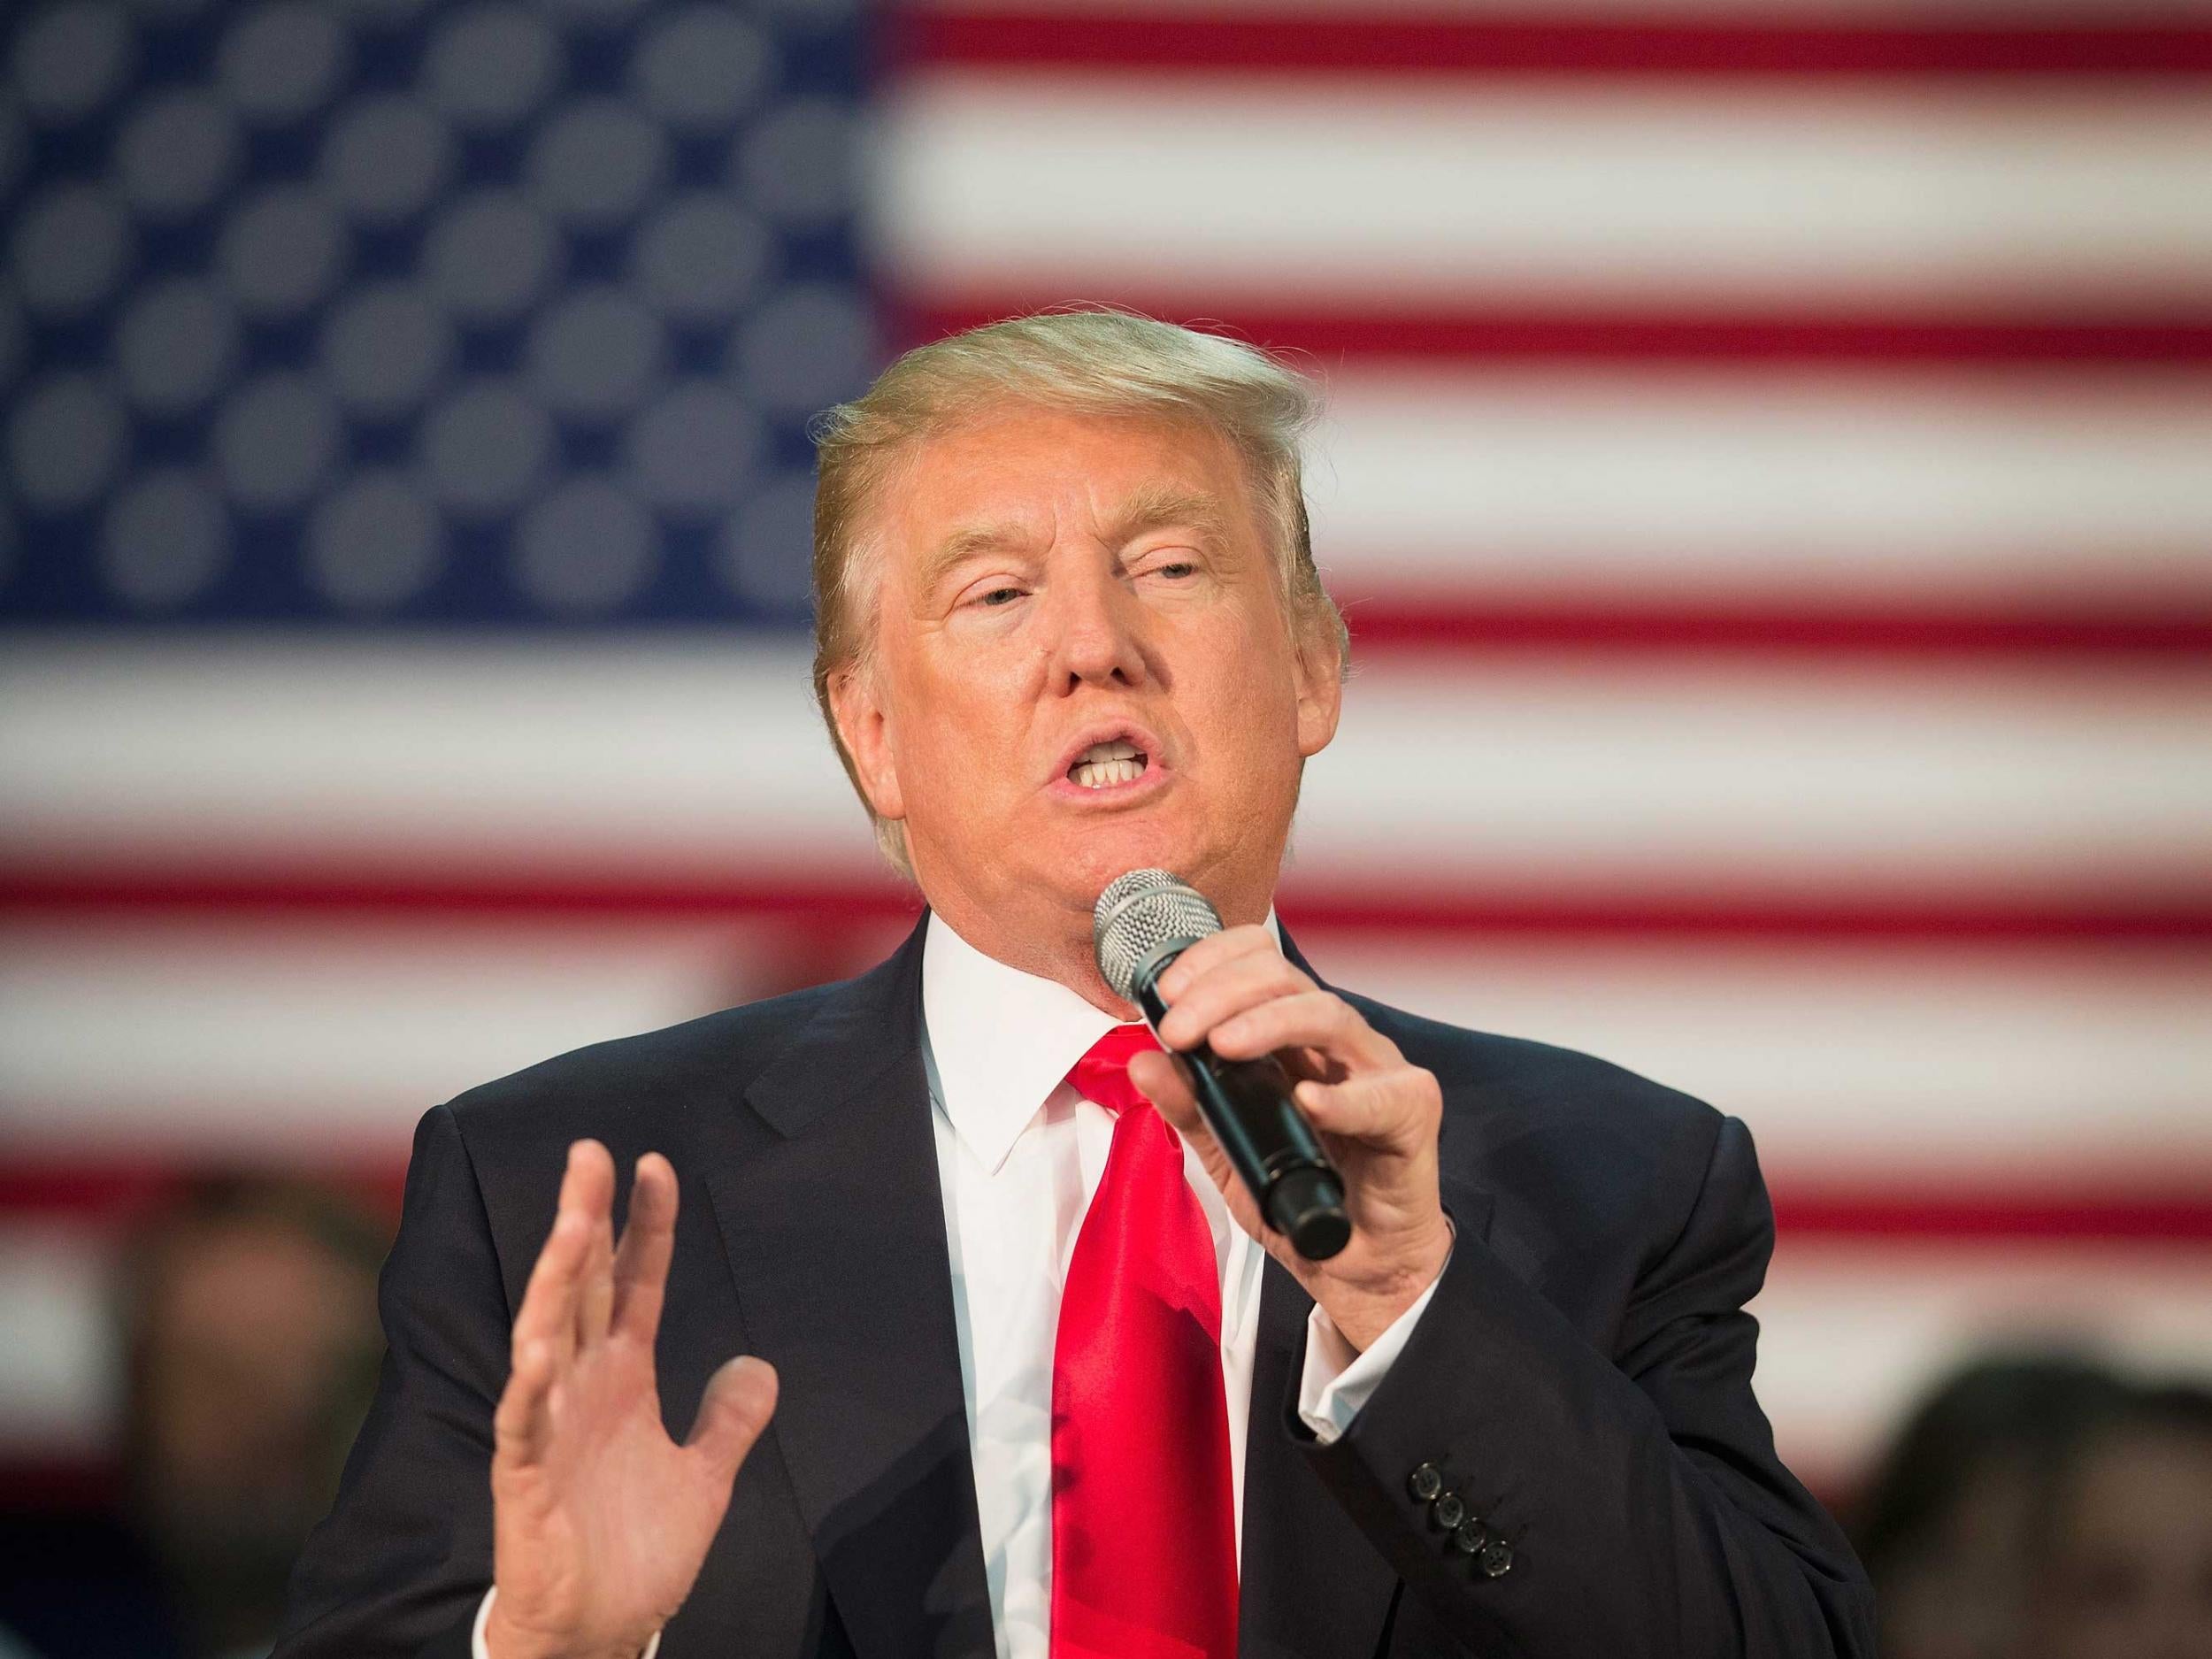 Donald Trump has previously blamed Mexican drug cartels for New Hampshire's drug addiction